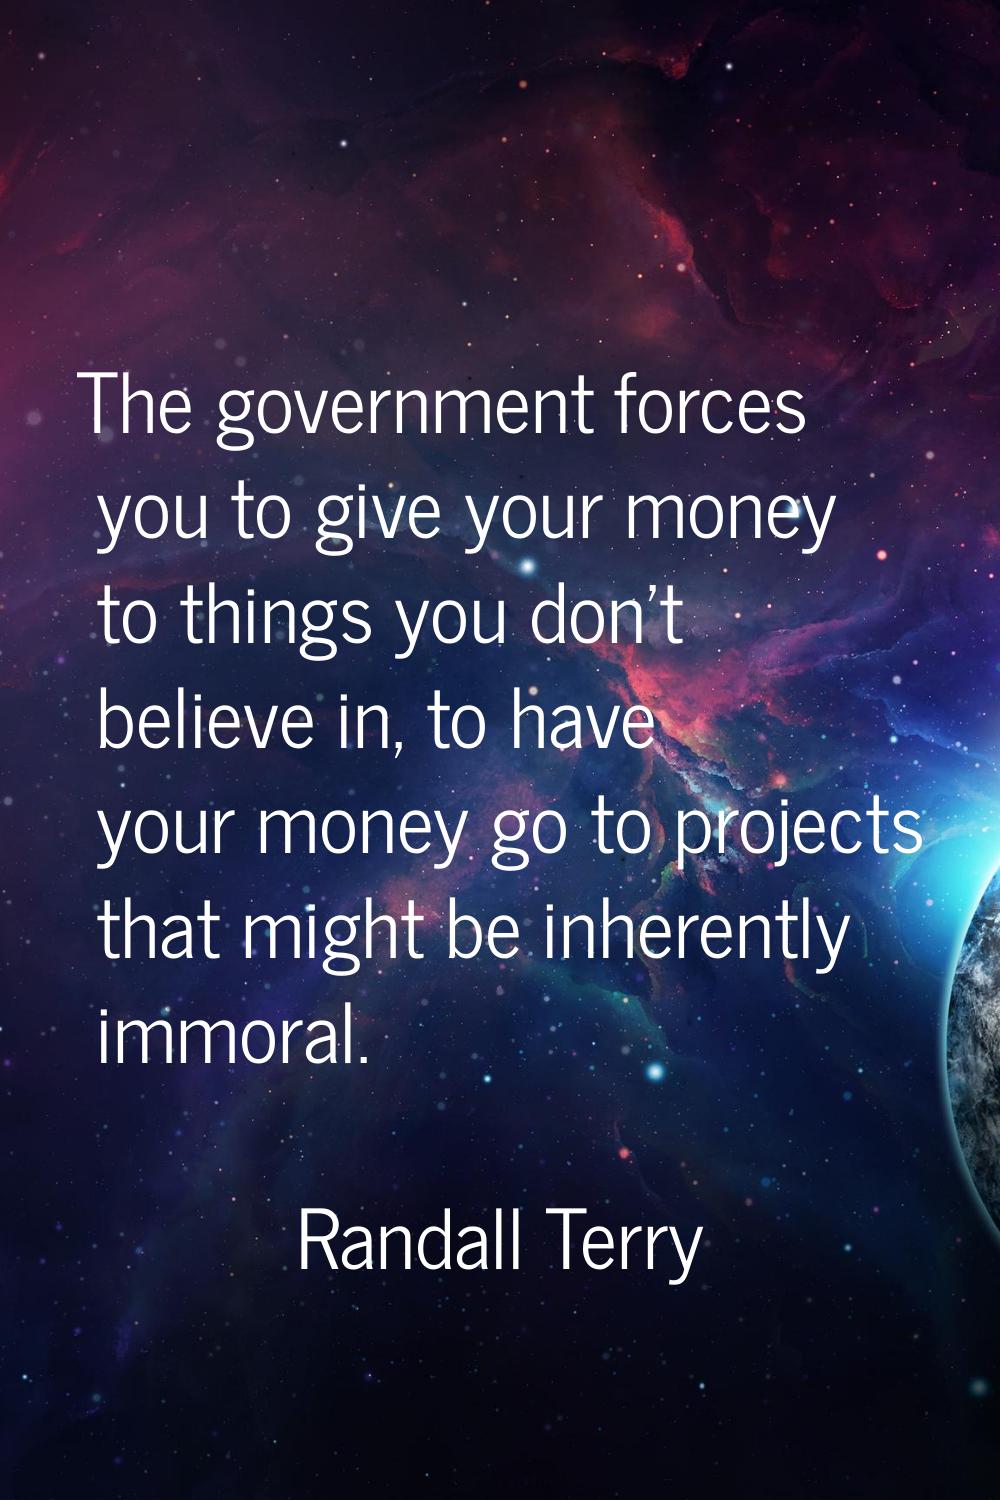 The government forces you to give your money to things you don't believe in, to have your money go 